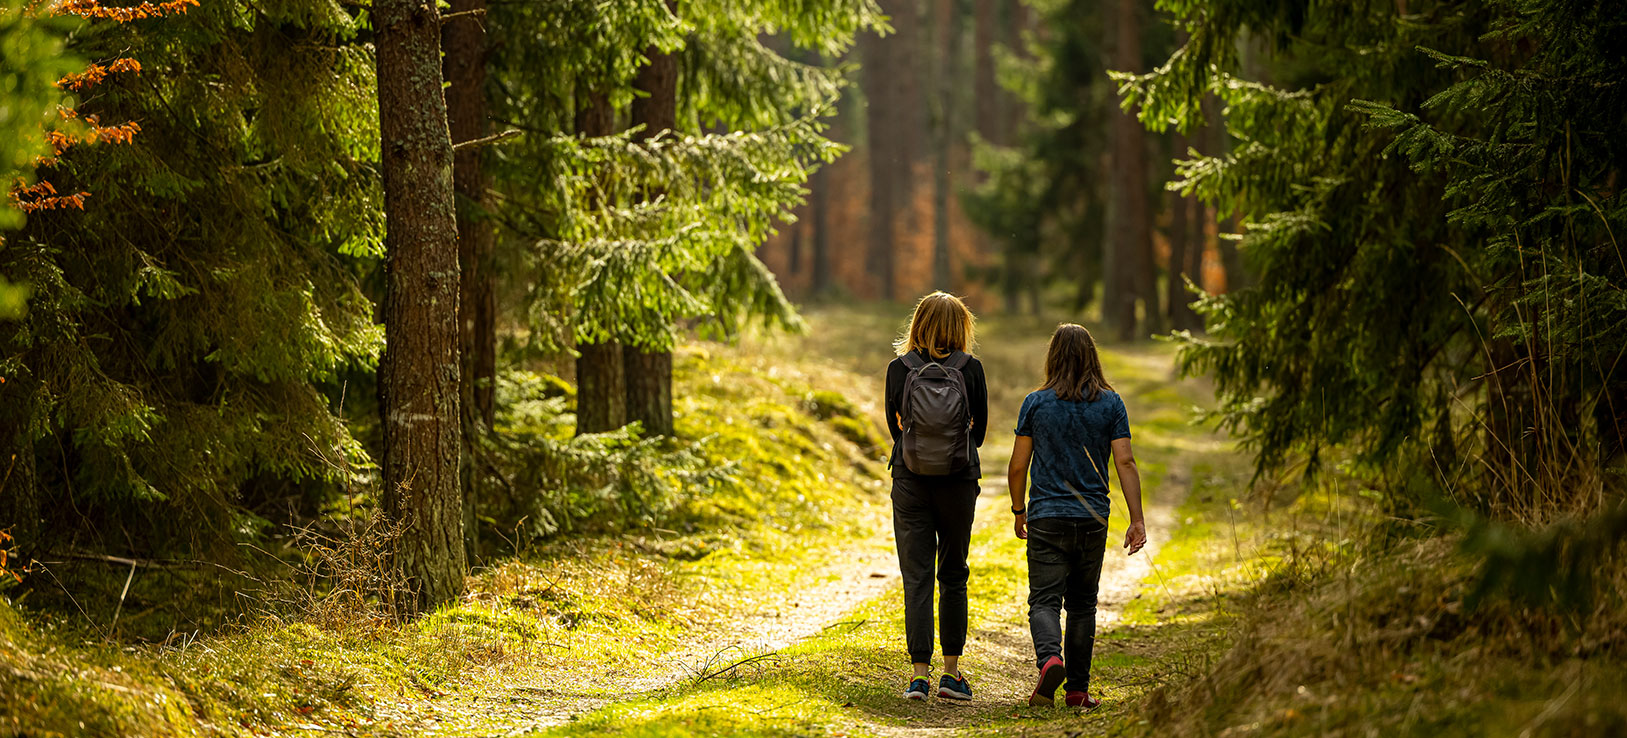 Two women hike together in forest